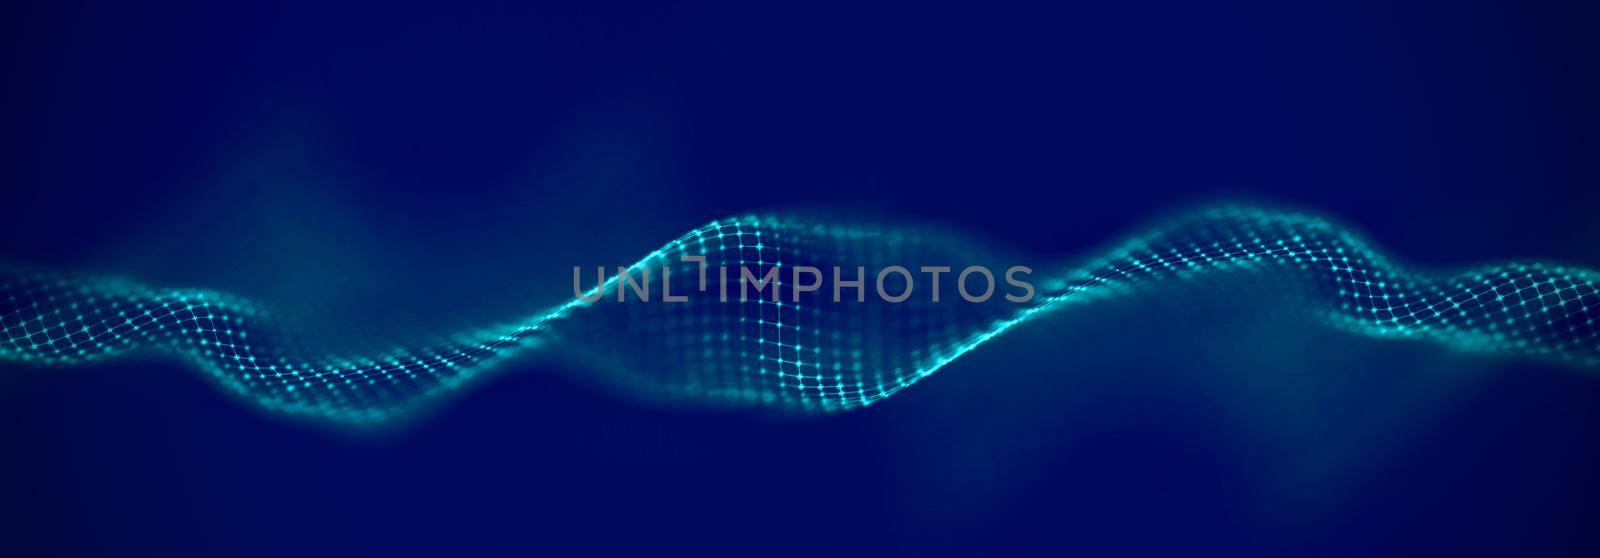 Modern abstract pattern on light backdrop. Digital technology background. Abstract tech background. Blue futuristic